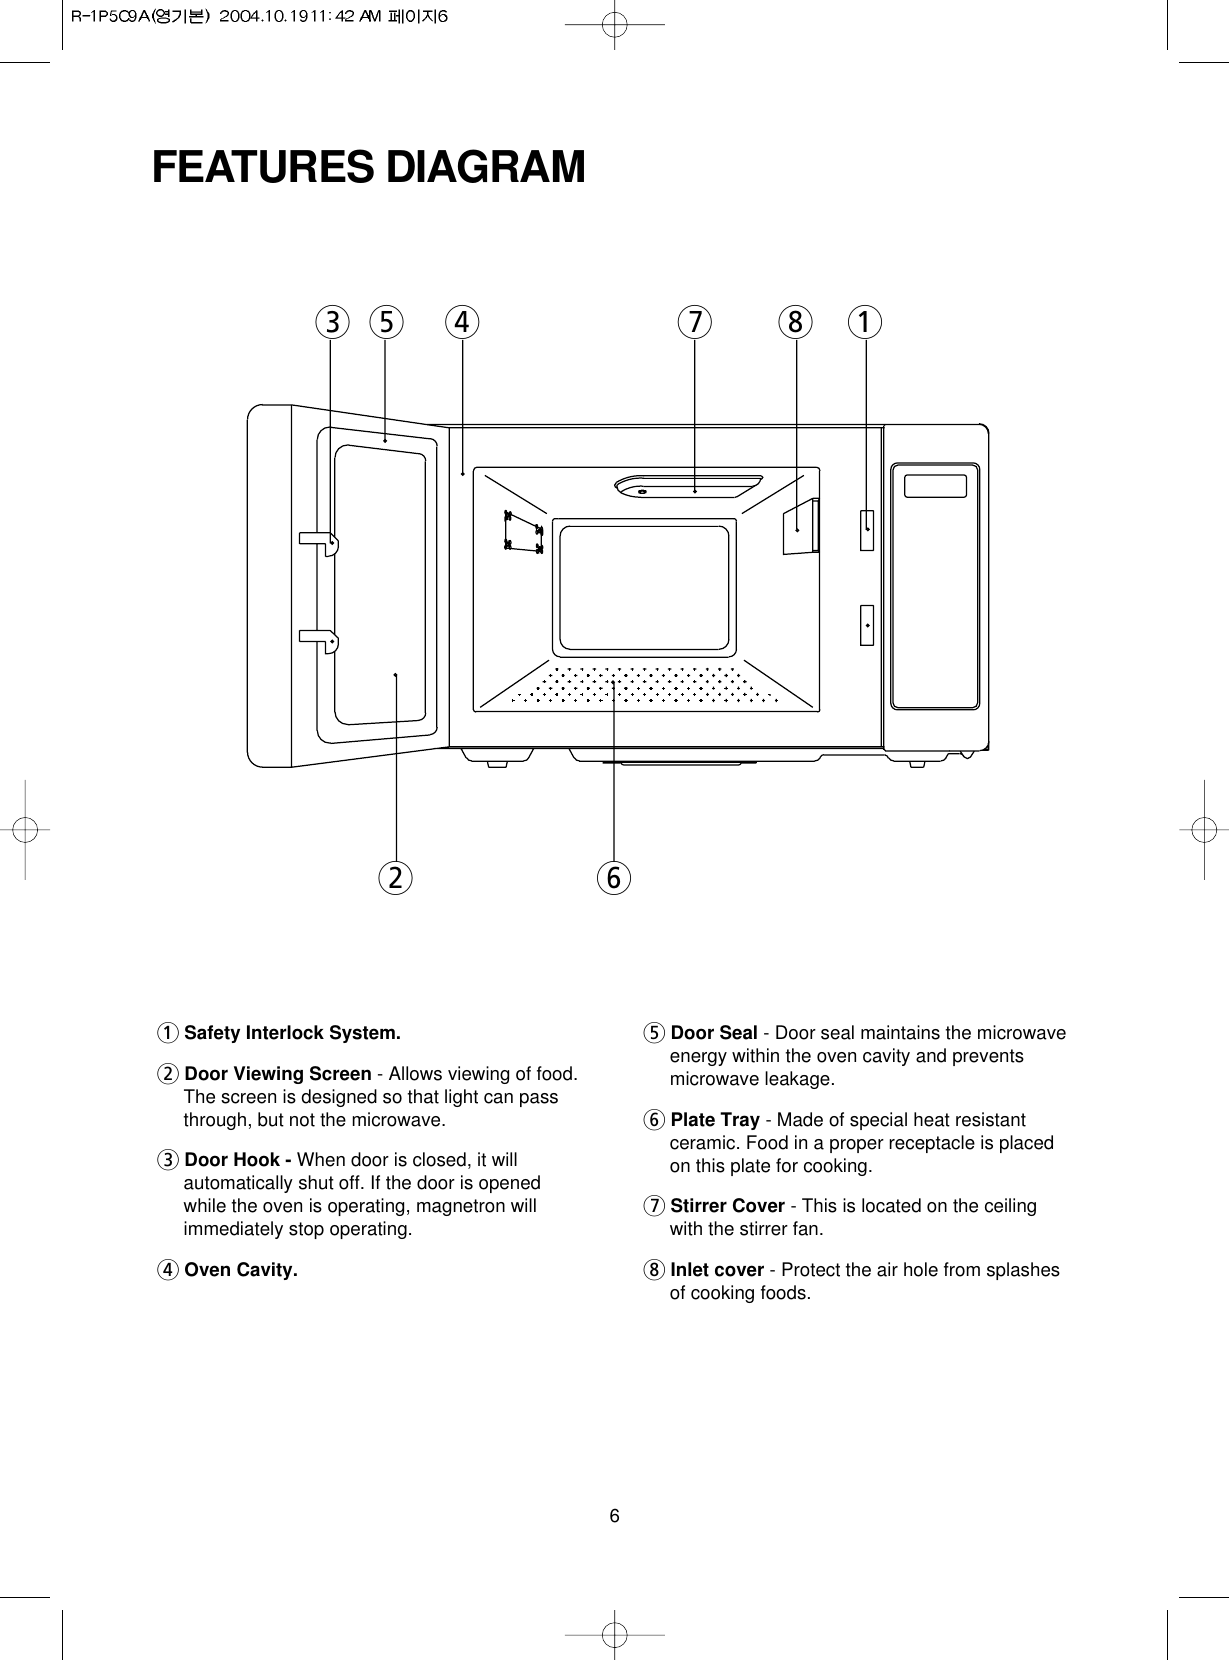 6FEATURES DIAGRAM1Safety Interlock System.2Door Viewing Screen - Allows viewing of food.The screen is designed so that light can passthrough, but not the microwave. 3Door Hook - When door is closed, it willautomatically shut off. If the door is openedwhile the oven is operating, magnetron willimmediately stop operating.4Oven Cavity.5Door Seal - Door seal maintains the microwaveenergy within the oven cavity and preventsmicrowave leakage.6Plate Tray - Made of special heat resistantceramic. Food in a proper receptacle is placedon this plate for cooking.7Stirrer Cover - This is located on the ceilingwith the stirrer fan.8Inlet cover - Protect the air hole from splashesof cooking foods.  35264781